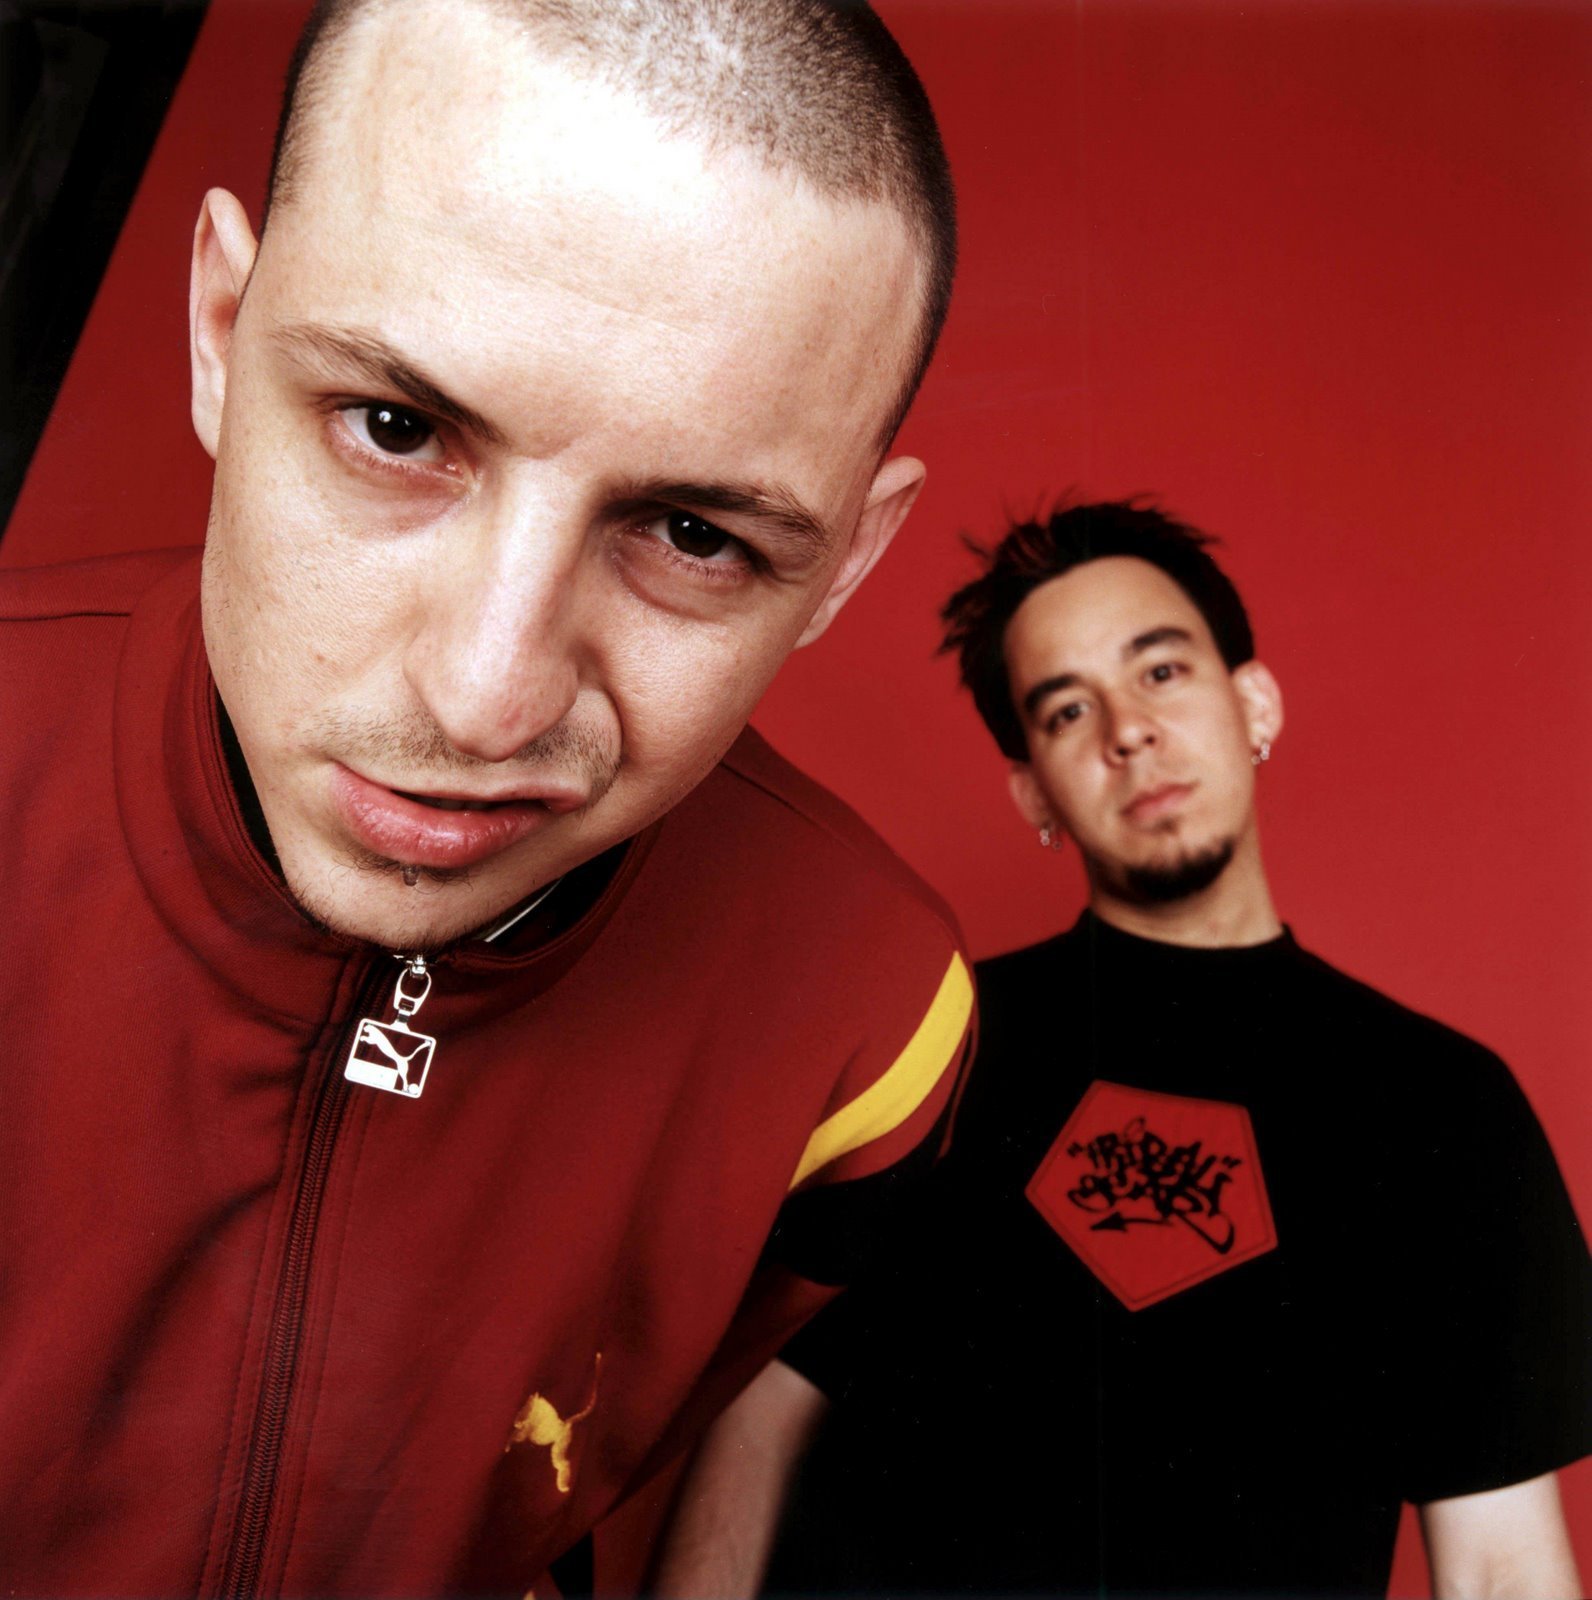 Chester-and-Mike-chester-bennington-11791462-1592-1600